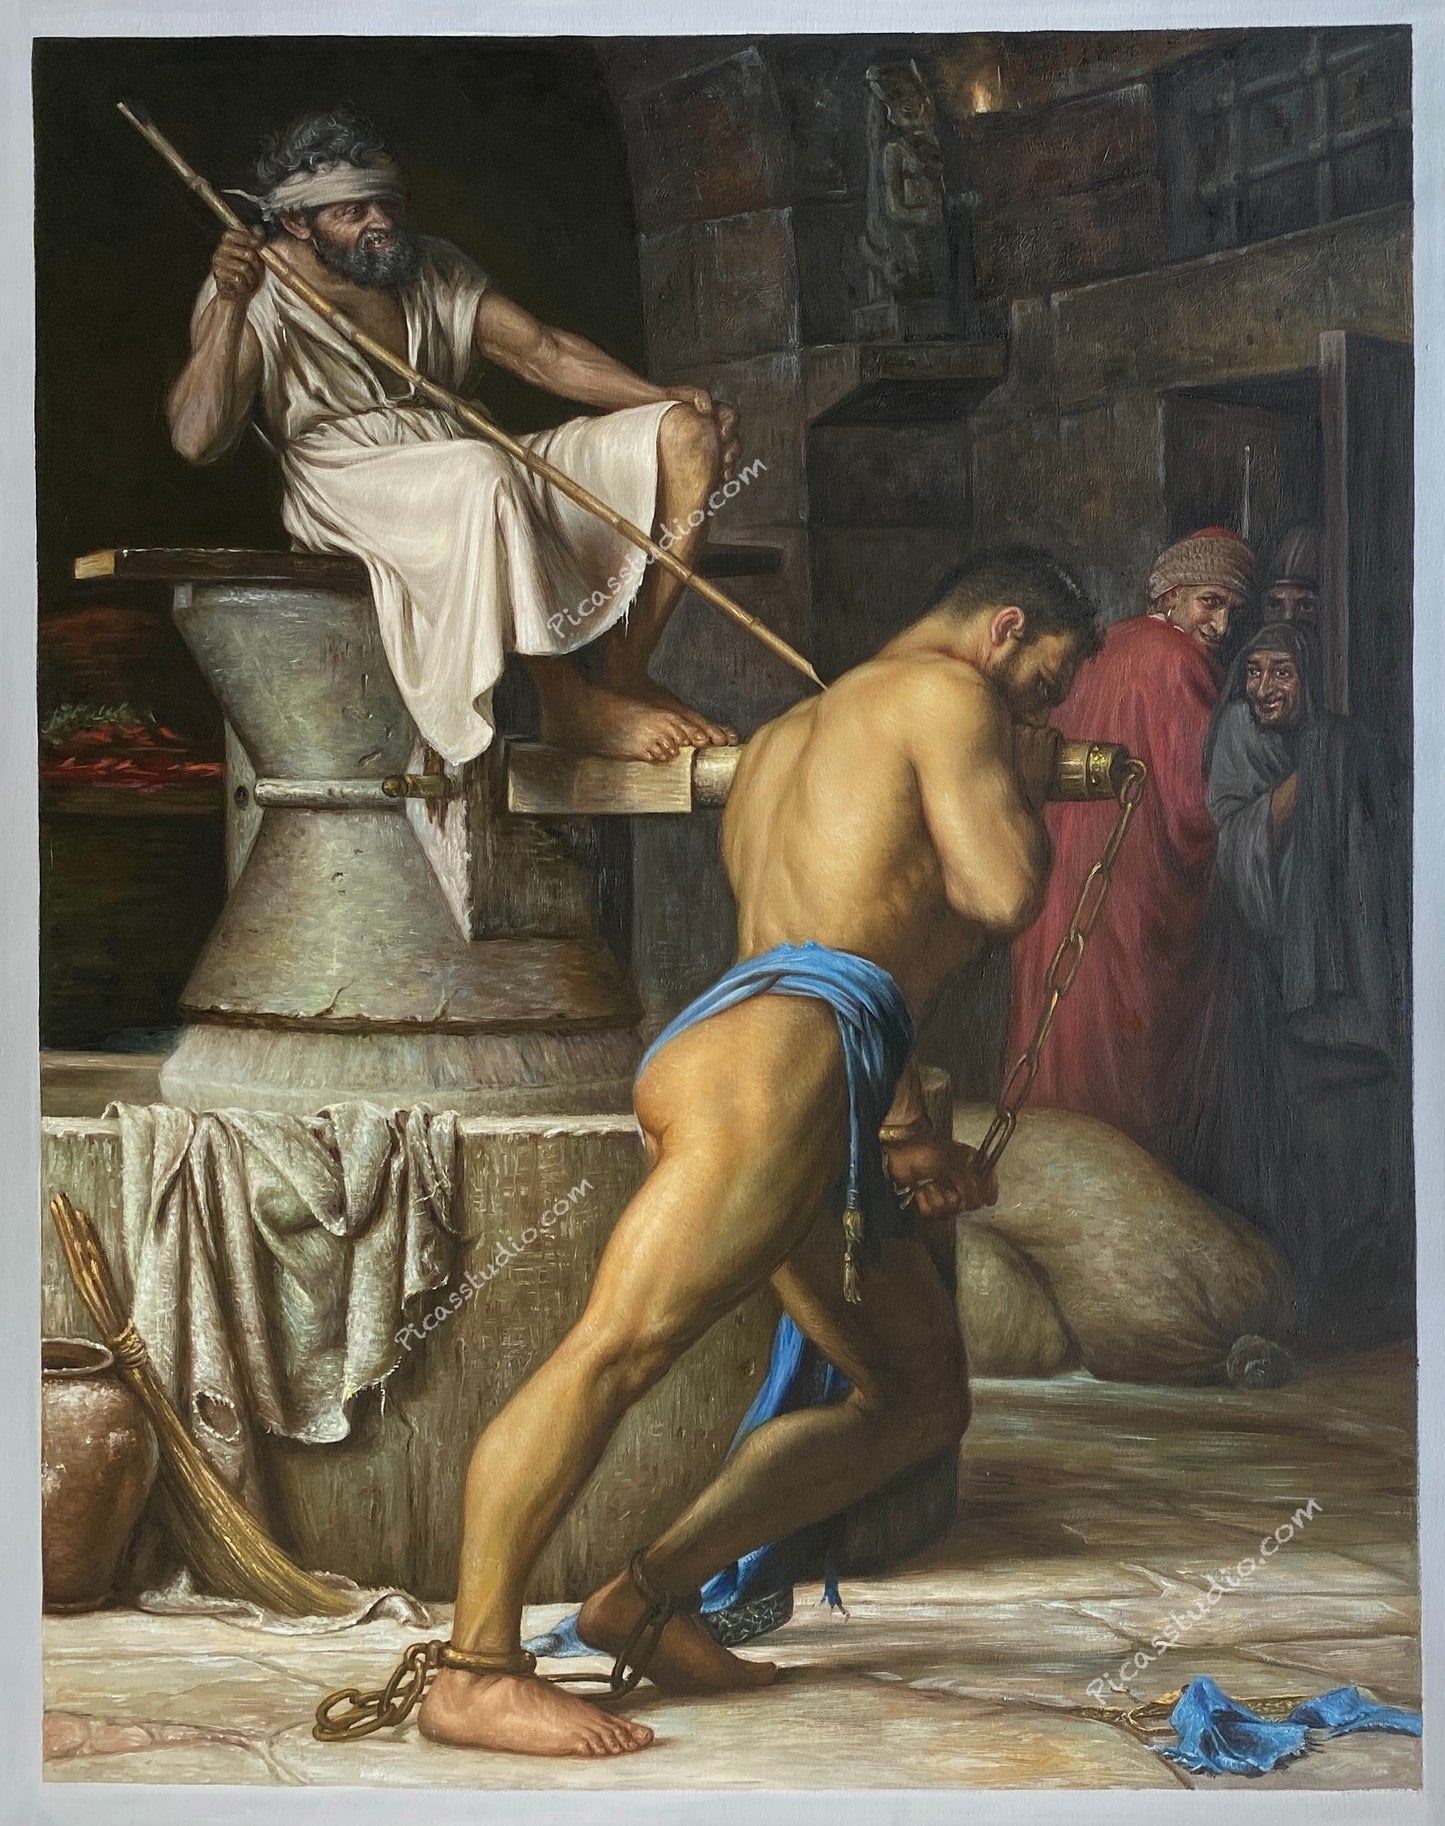 Samson and the Philistines by Carl Heinrich Bloch Oil Painting Hand Painted Art on Canvas Wall Decor Unframed